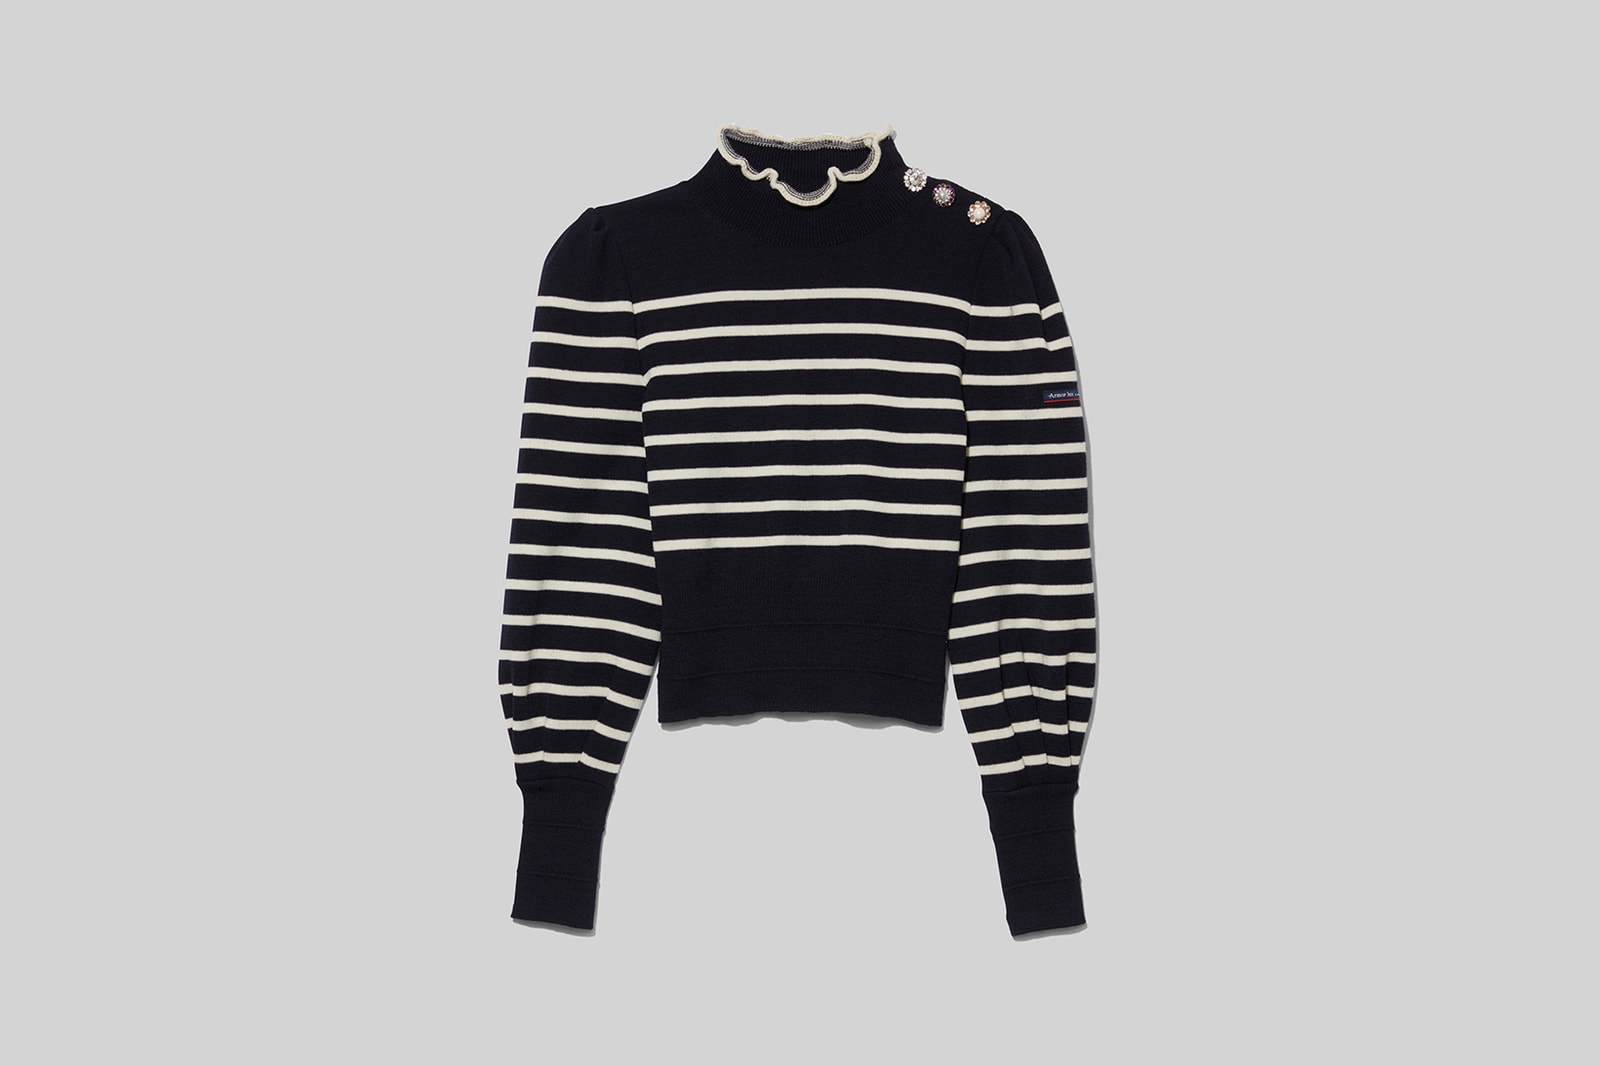 Marc Jacobs x Armor-lux Collaboration Collection Breton Stripe Sweater